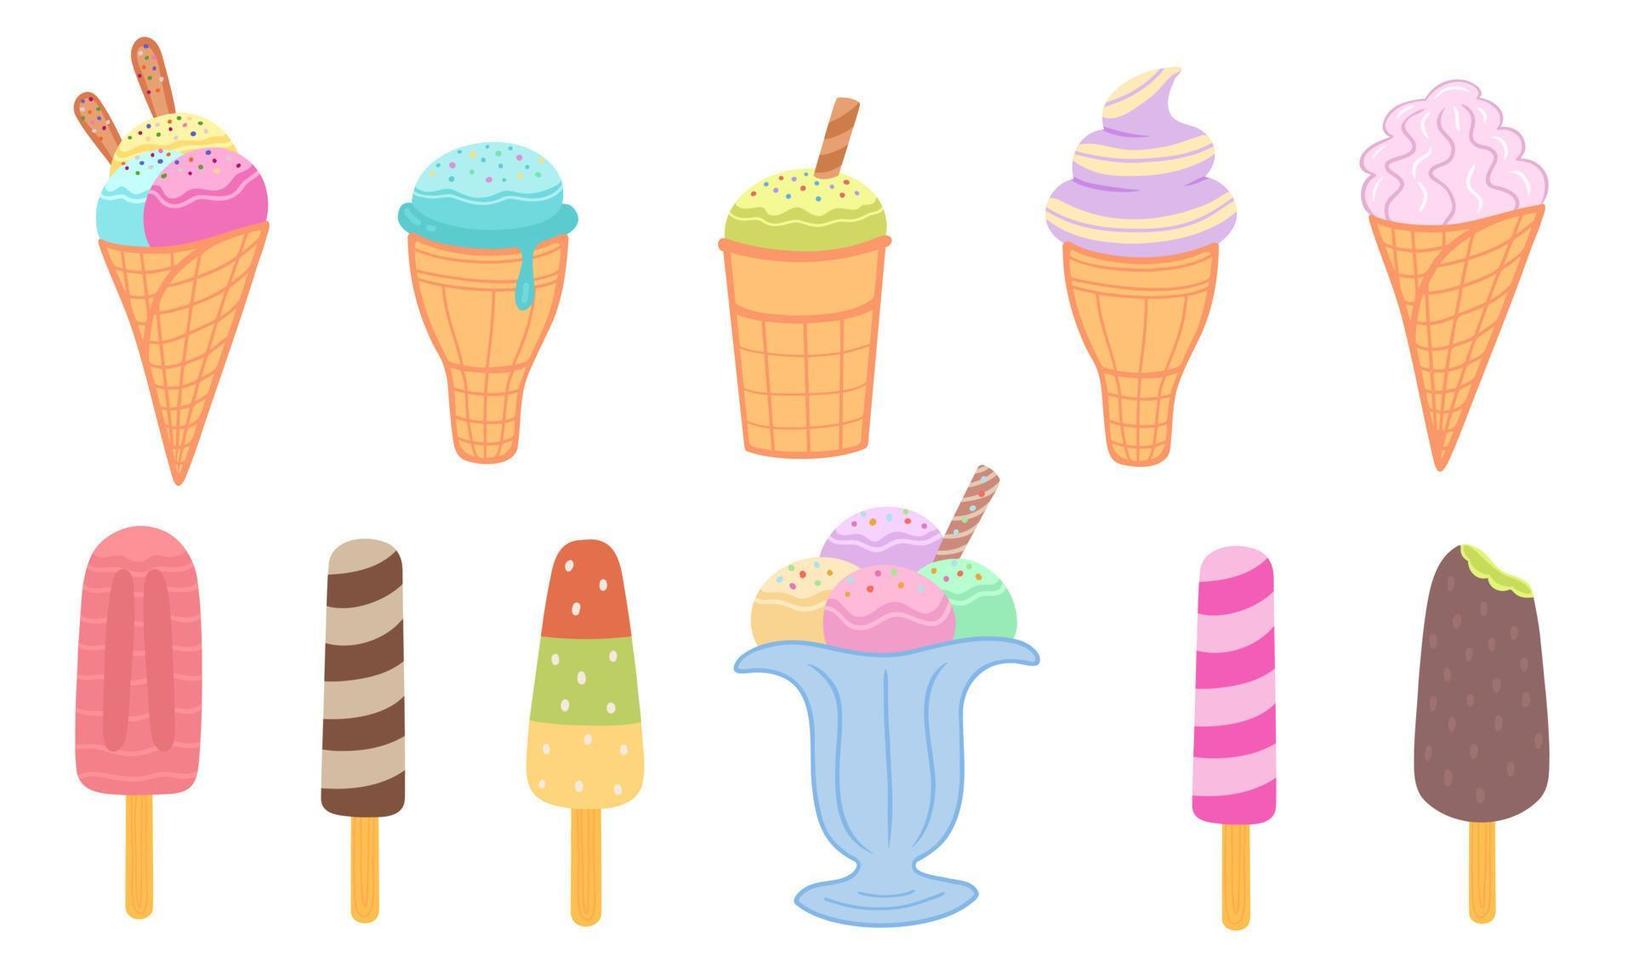 Ice cream collection, set. Illustration for printing, backgrounds, covers, packaging, greeting cards, posters, stickers, textile and seasonal design. Isolated on white background. vector